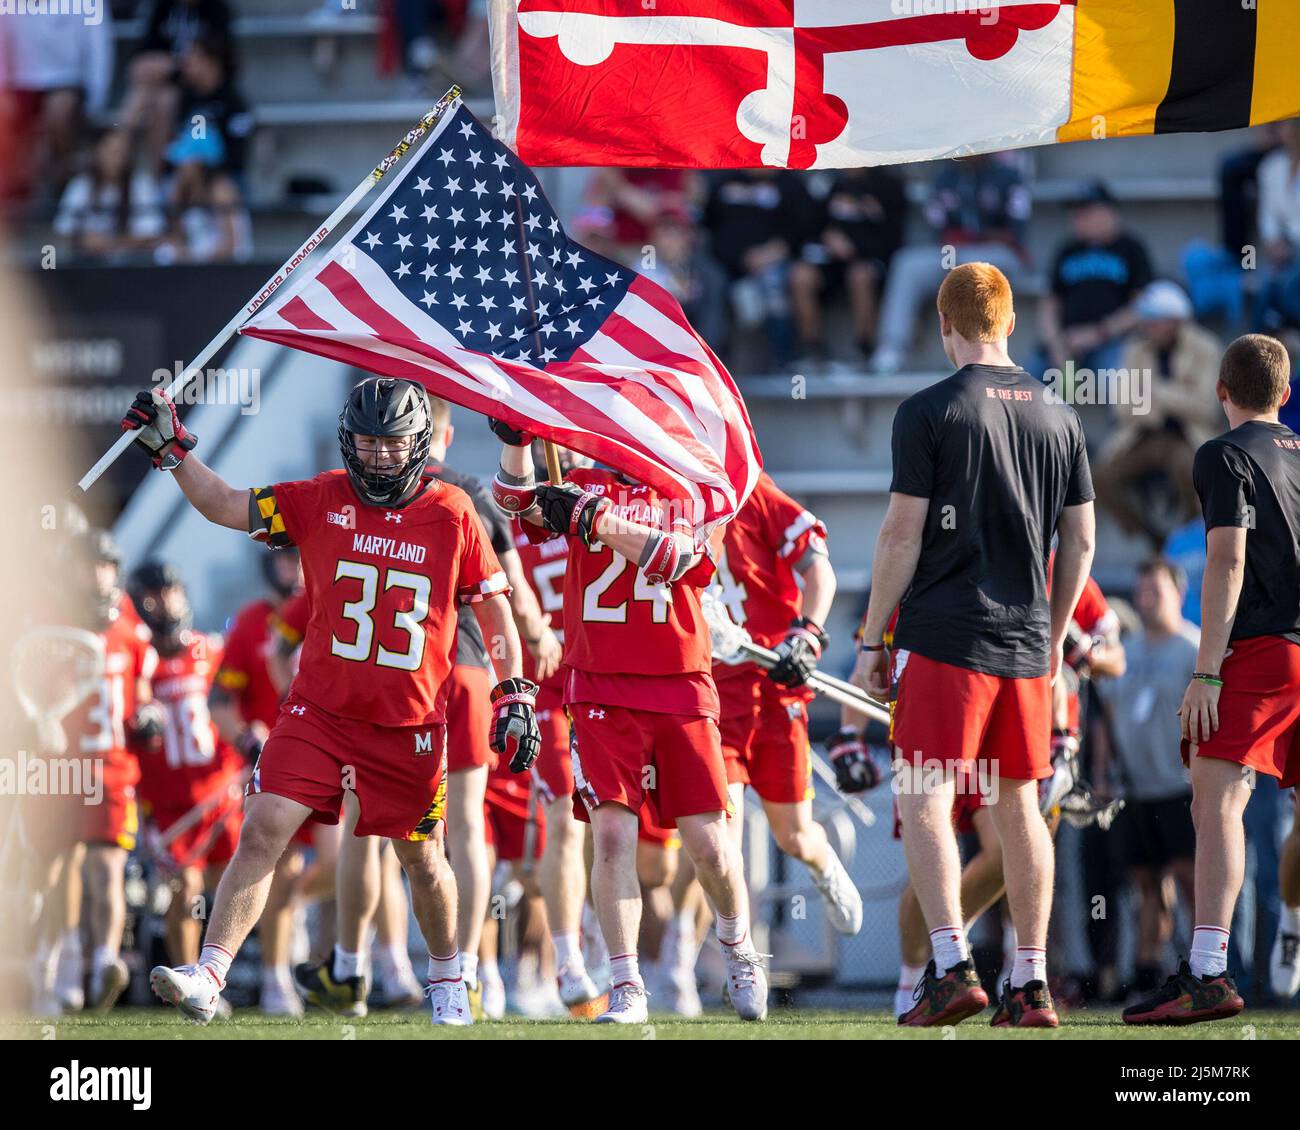 April 23, 2022: The Maryland Terrapins take the field before the ncaa men's lacrosse regular season finale between the Maryland Terrapins and the Johns Hopkins Blue Jays at Homewood Field in Baltimore, Maryland Photographer: Cory Royster Stock Photo